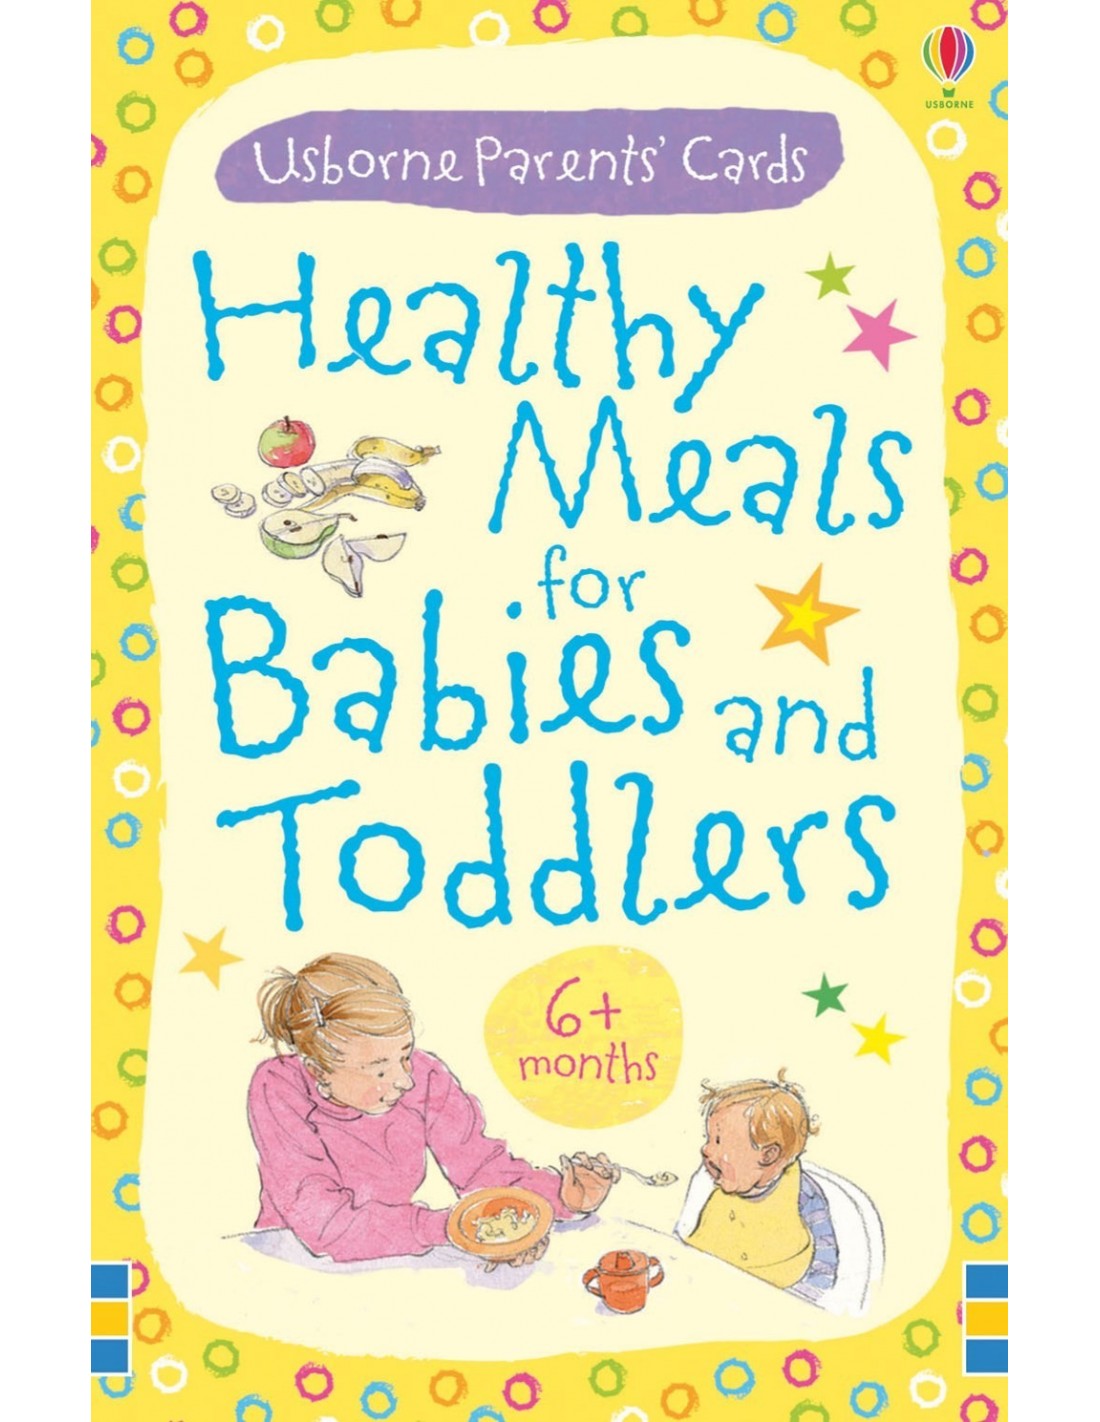 Healthy meals for babies and toddlers: 6+ months